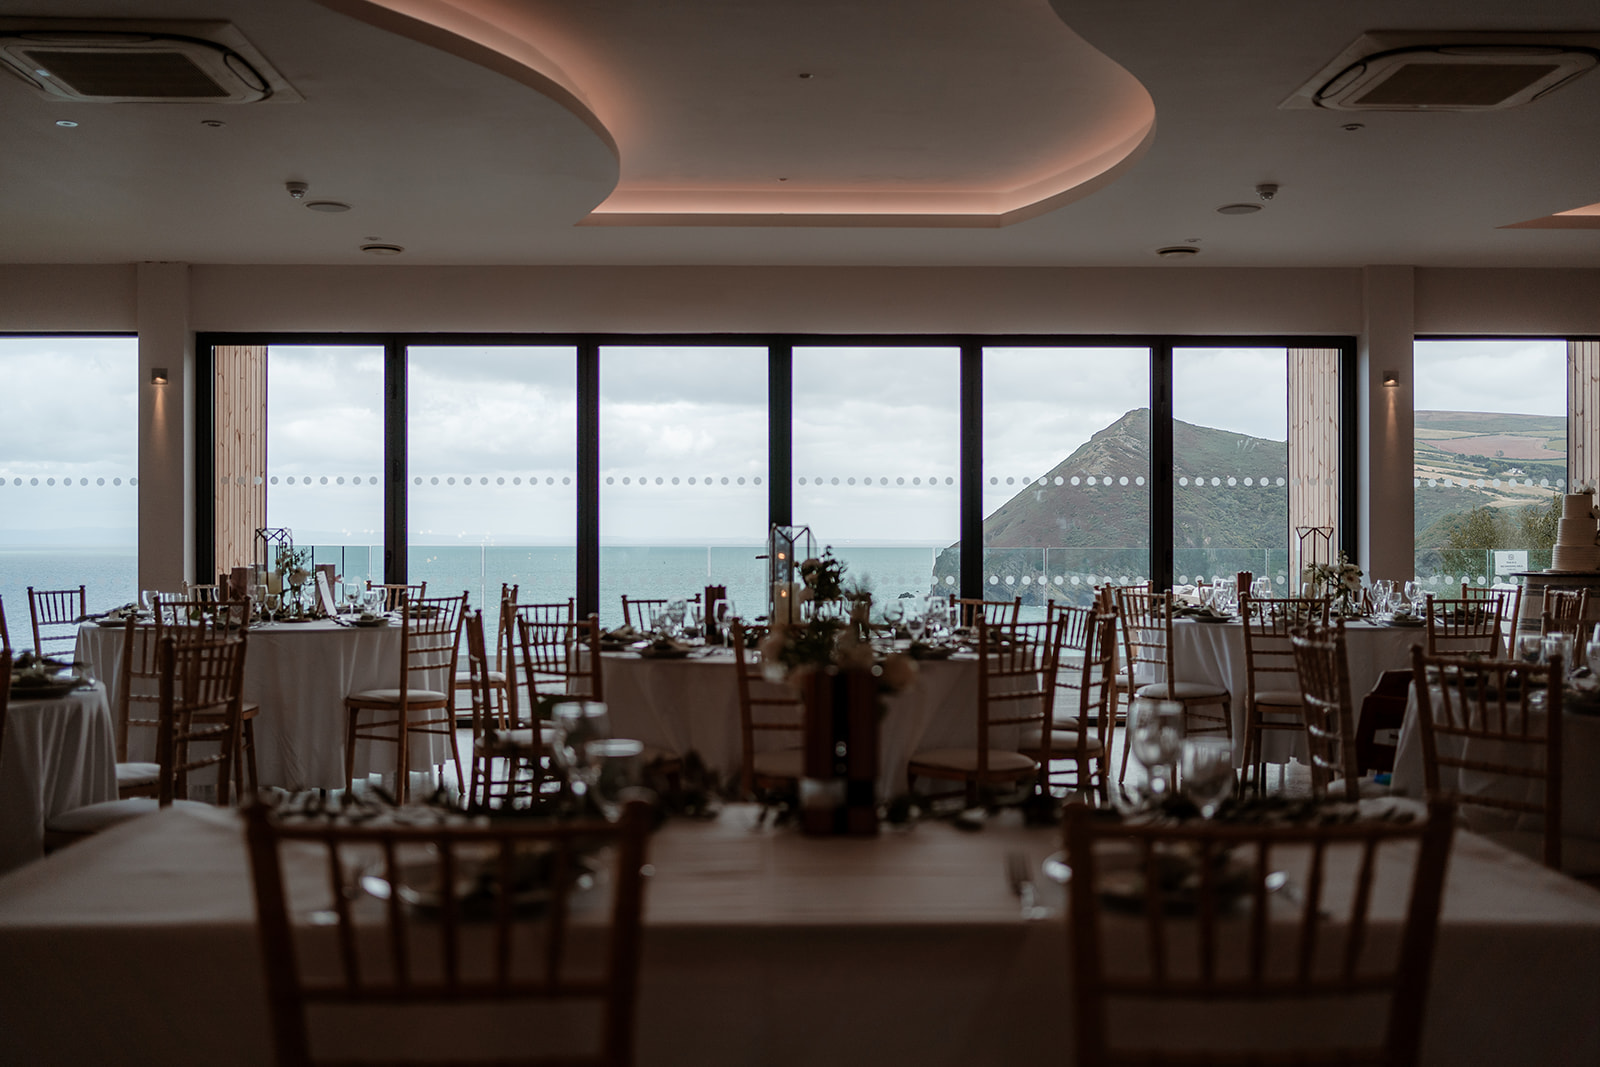 View from the sweetheart table looking over the wedding breakfast room and views through the windows at Sandy Cove Hotel